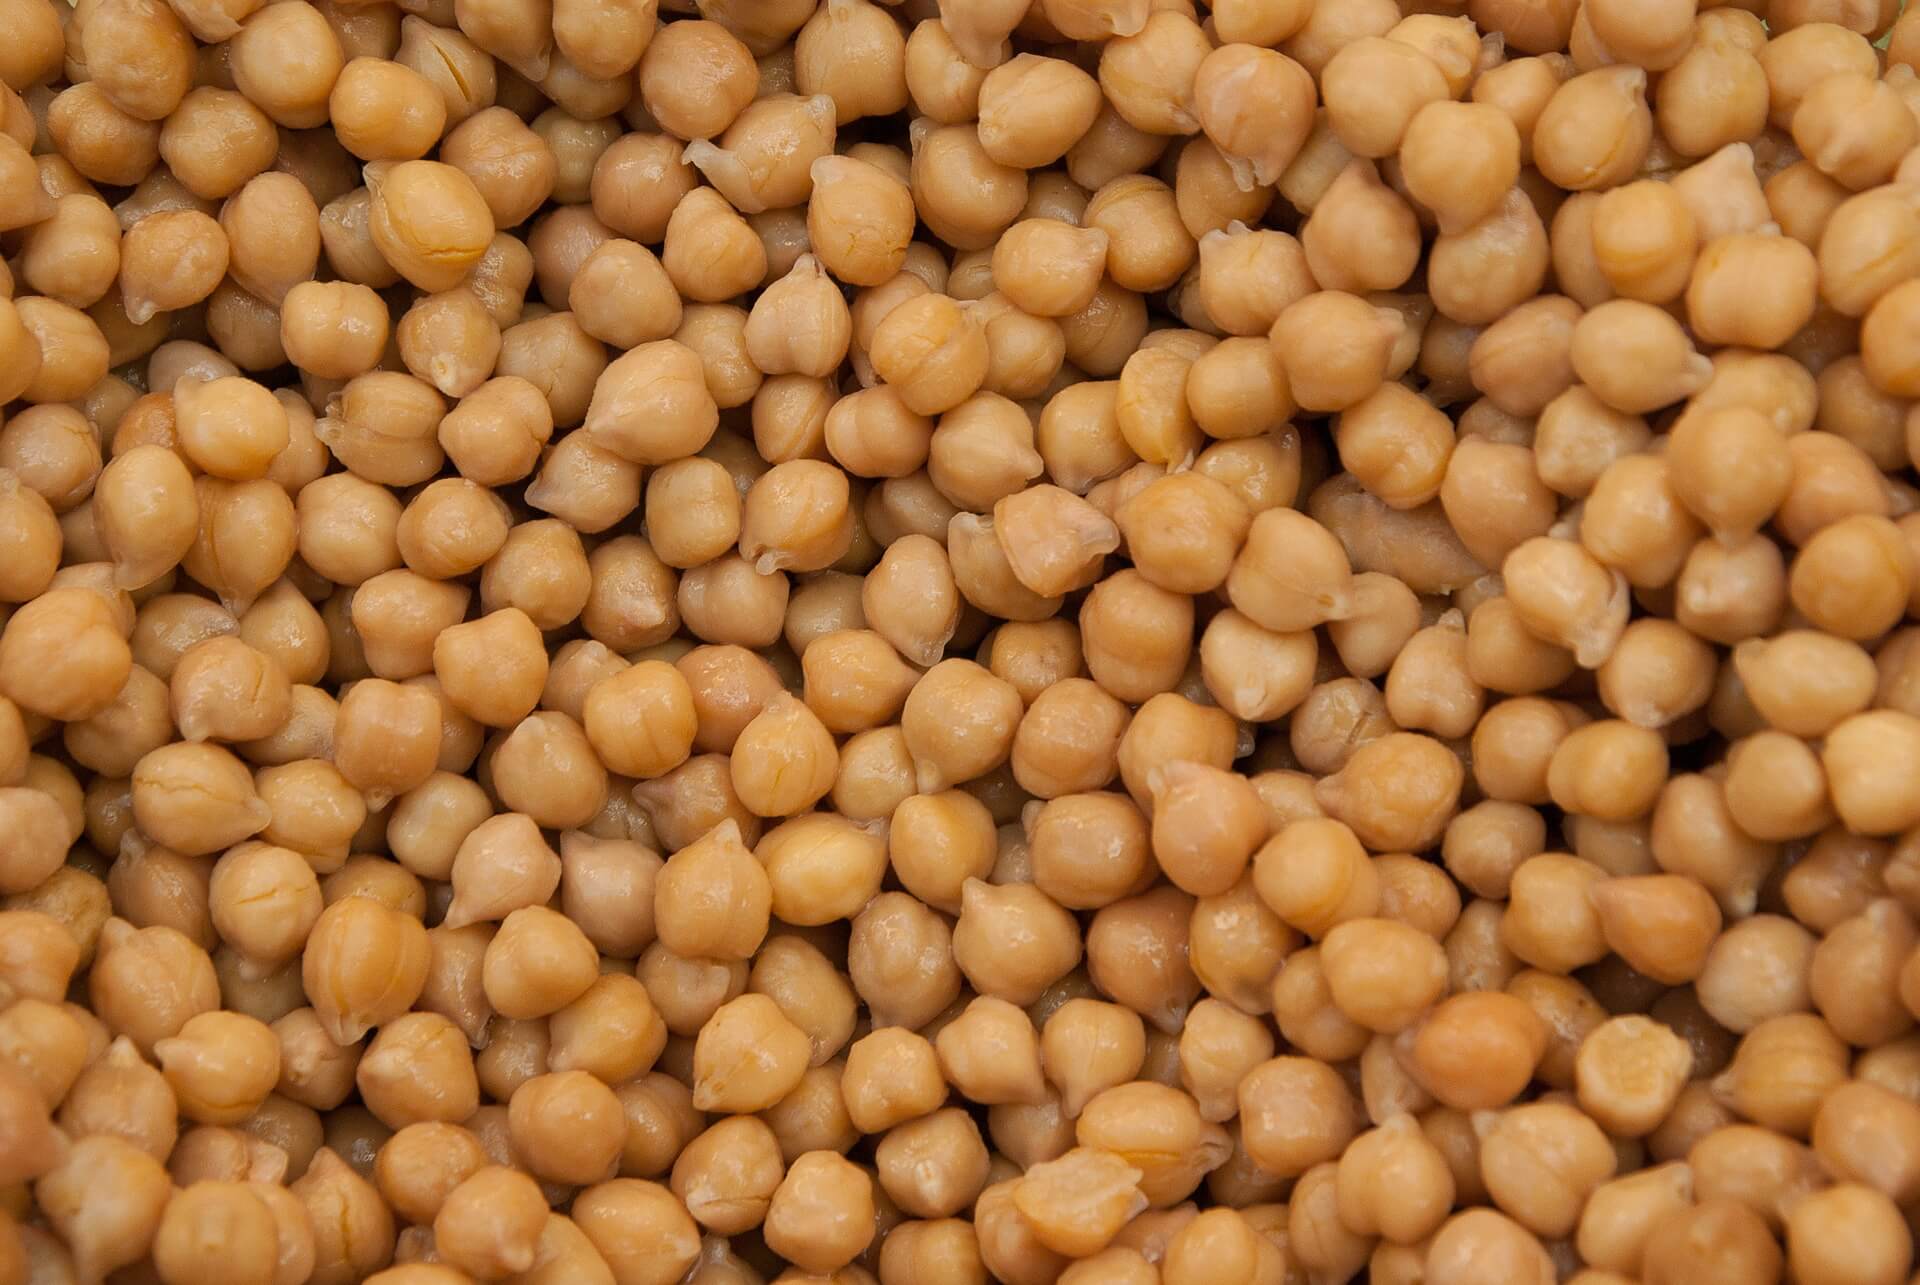 A close up of some chickpeas